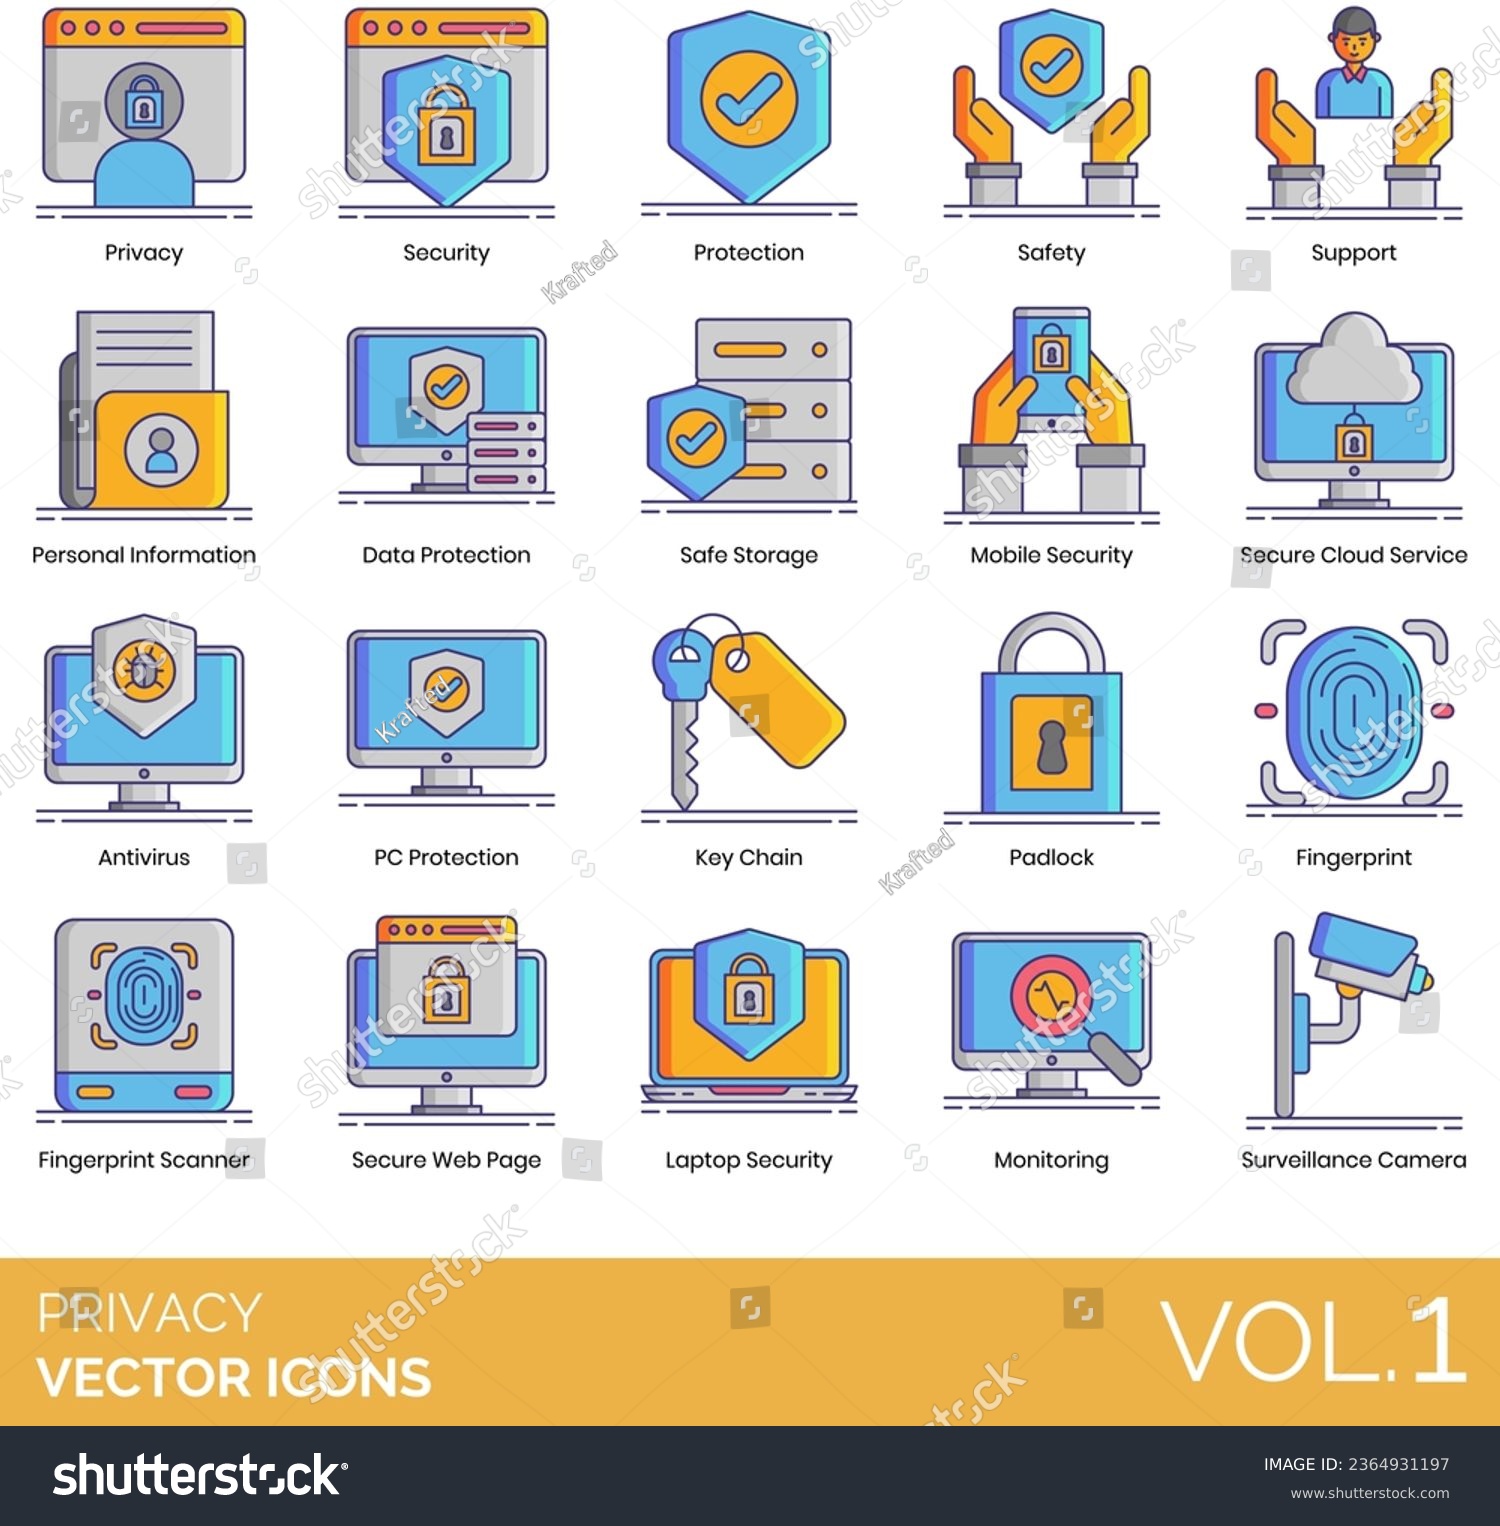 SVG of Privacy Icons including Security, Smart Doorbell, Smart Home Security, Social Media Presence, Support, Surveillance Camera, Targeted Marketing, Tracking Cookies, Unambiguous Consent svg